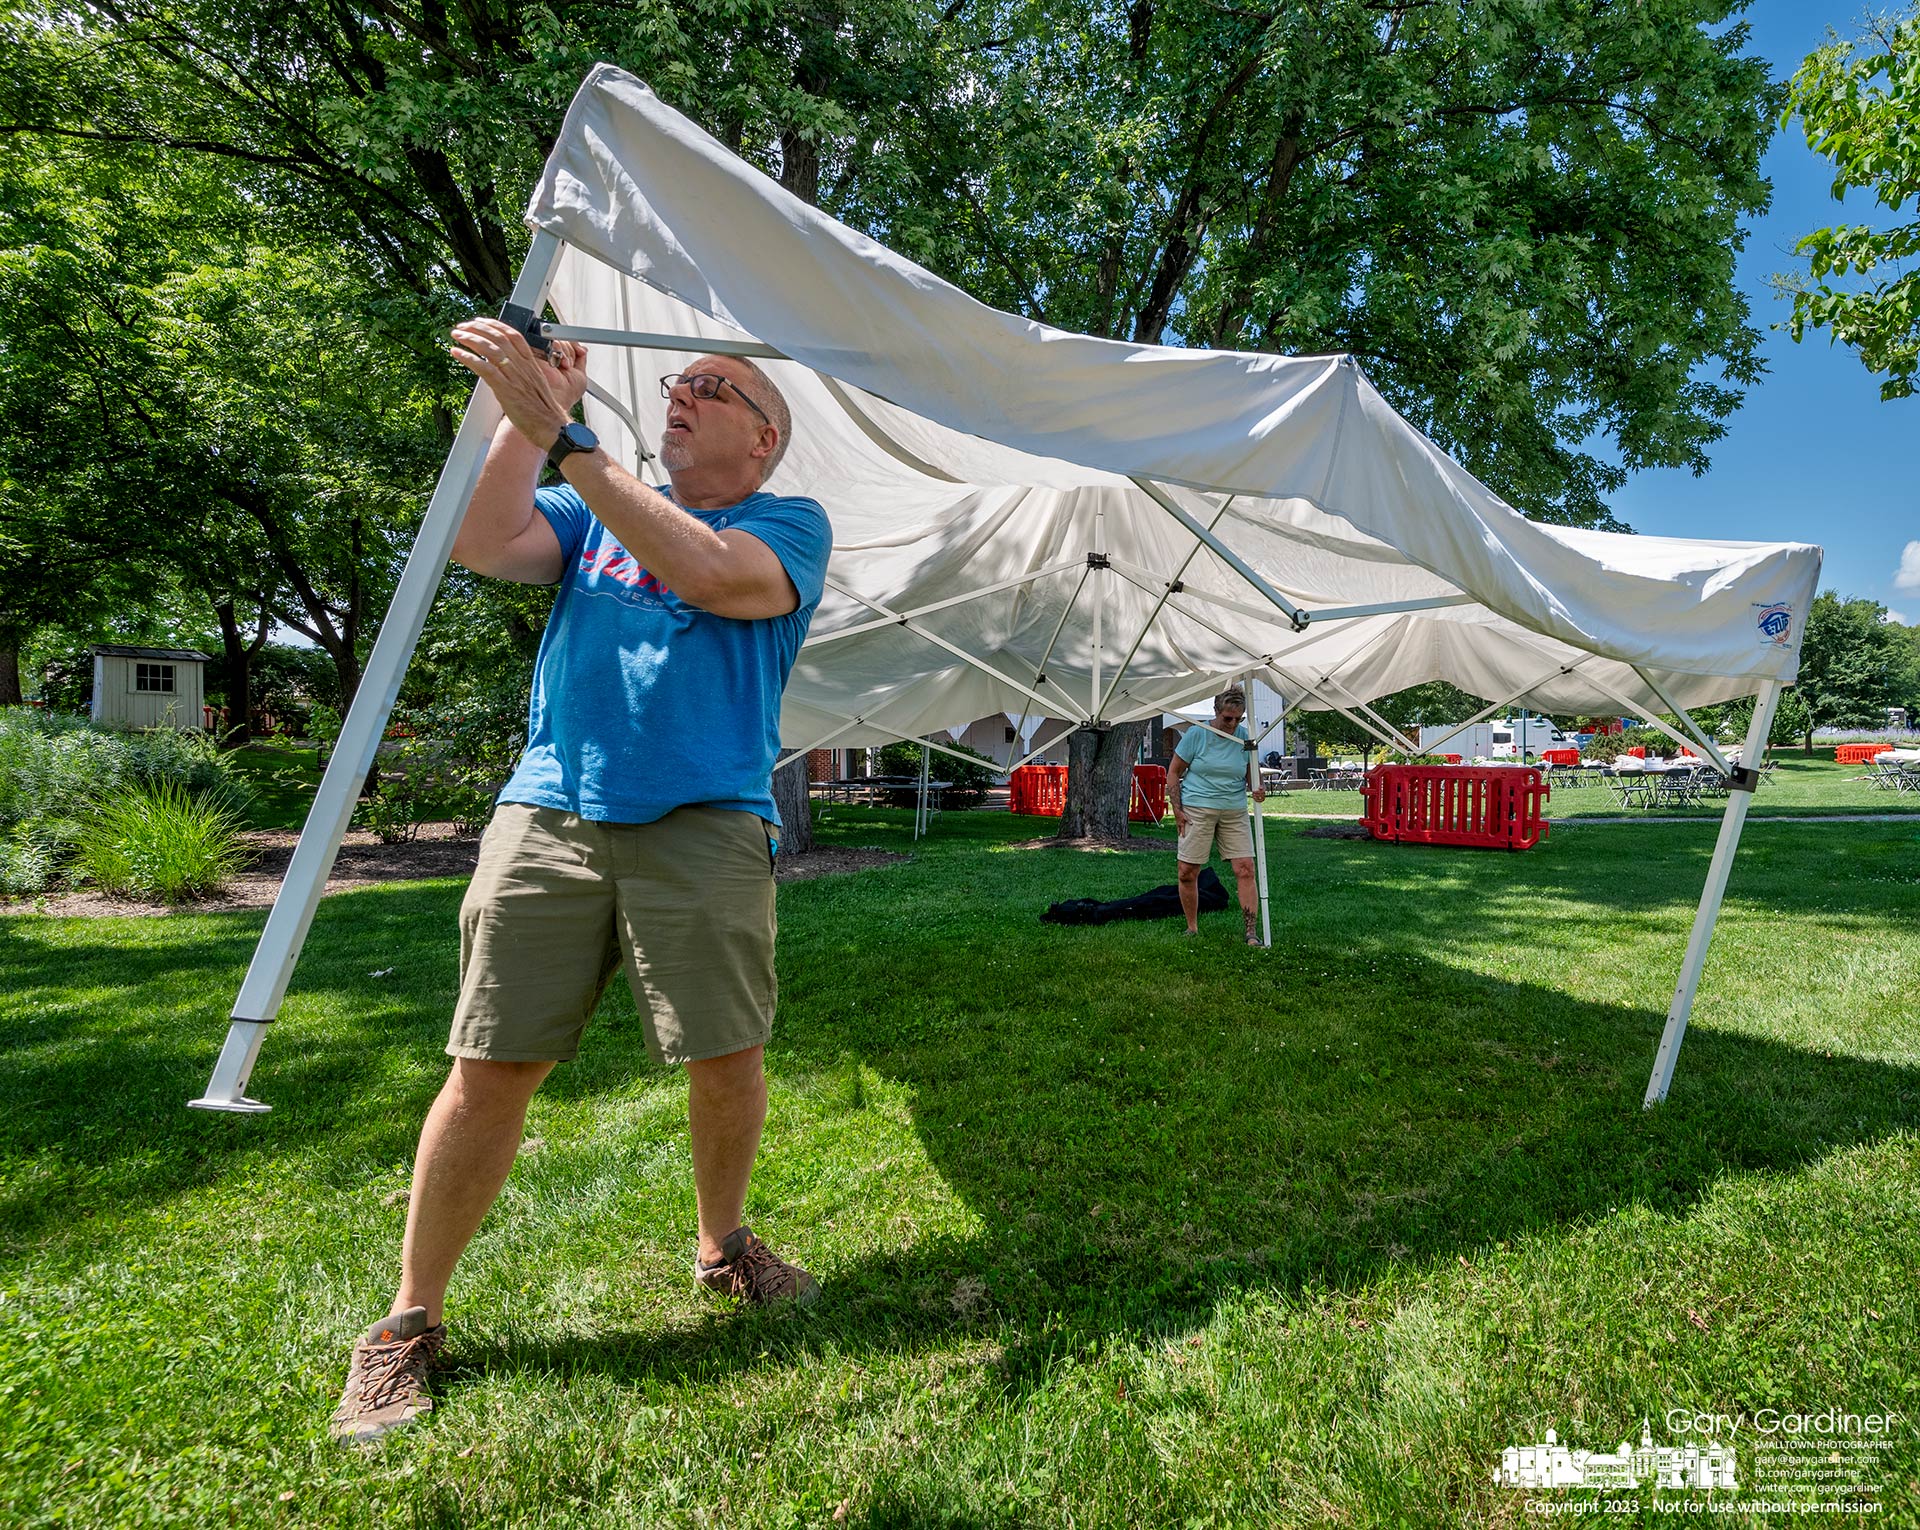 An artist's helper gives extra pressure to secure a popup tent pole as he and others set up spaces in Heritage Park for the weekend's Westerville Music and Arts Festival. My Final Photo for July 7, 2023.